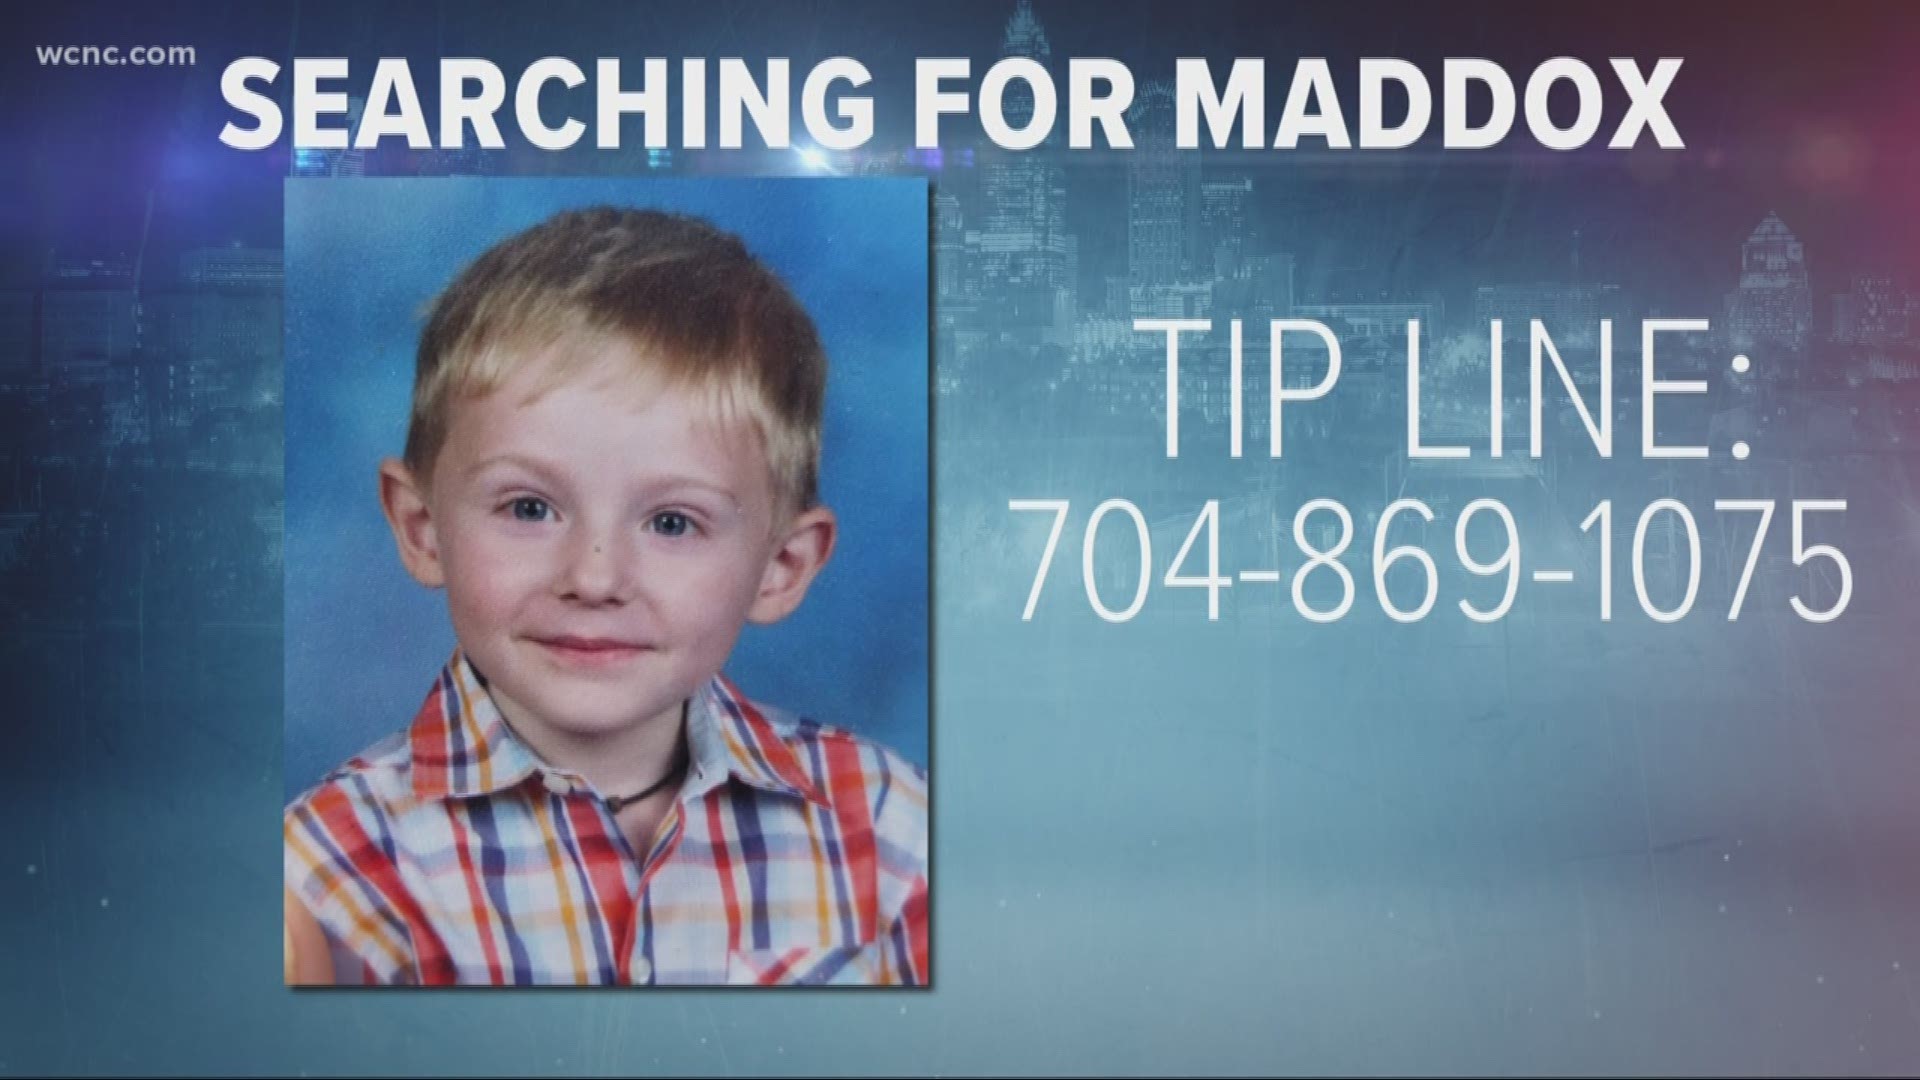 Authorities continue to search land and water for the missing 6-year-old boy with autism.